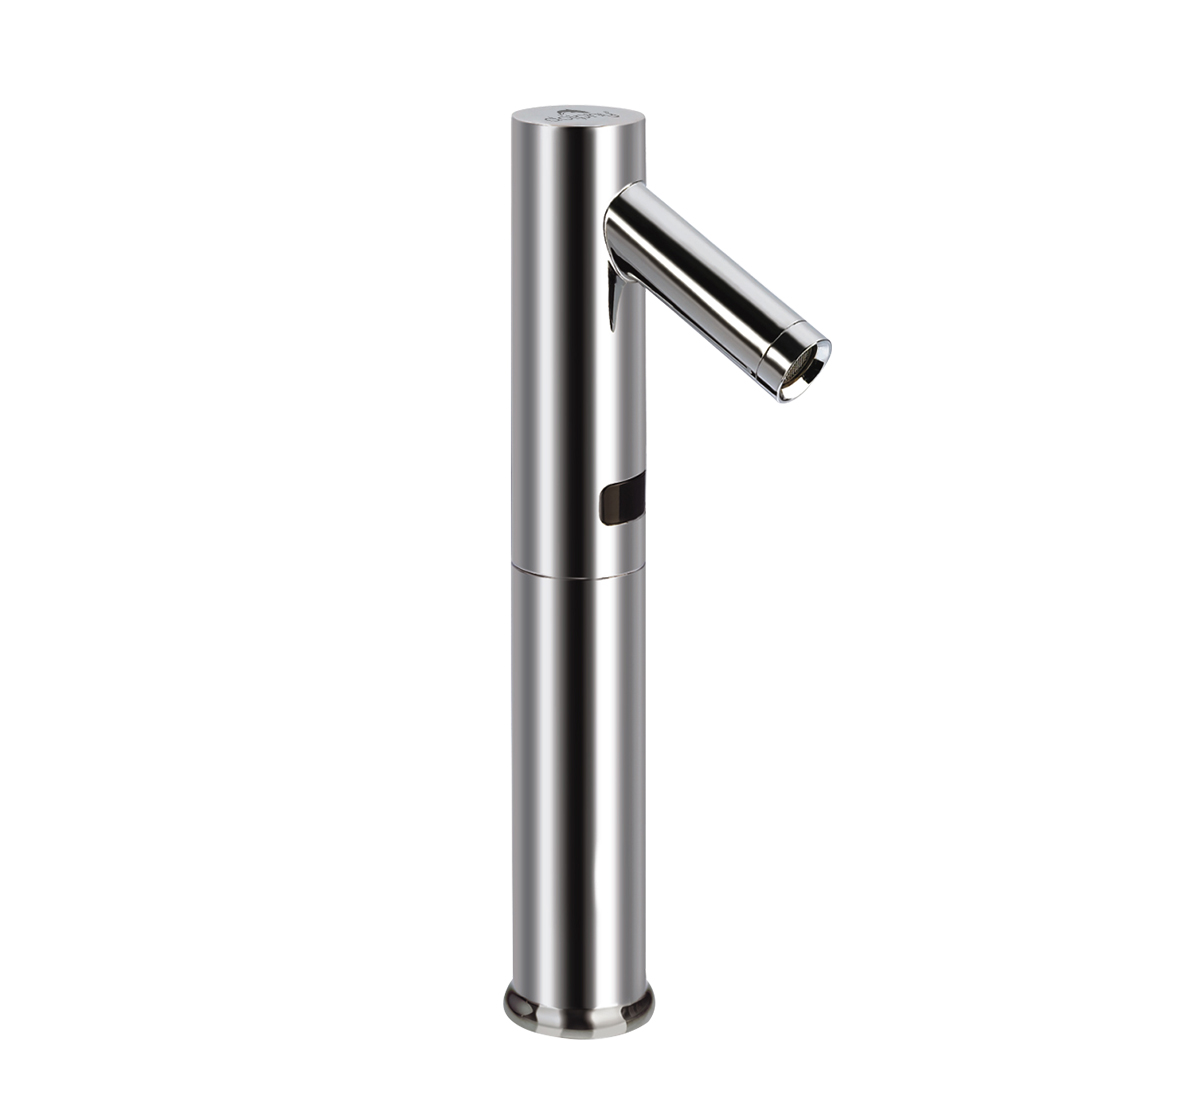 Silver chrome plated Sensor taps with infrared Sensor